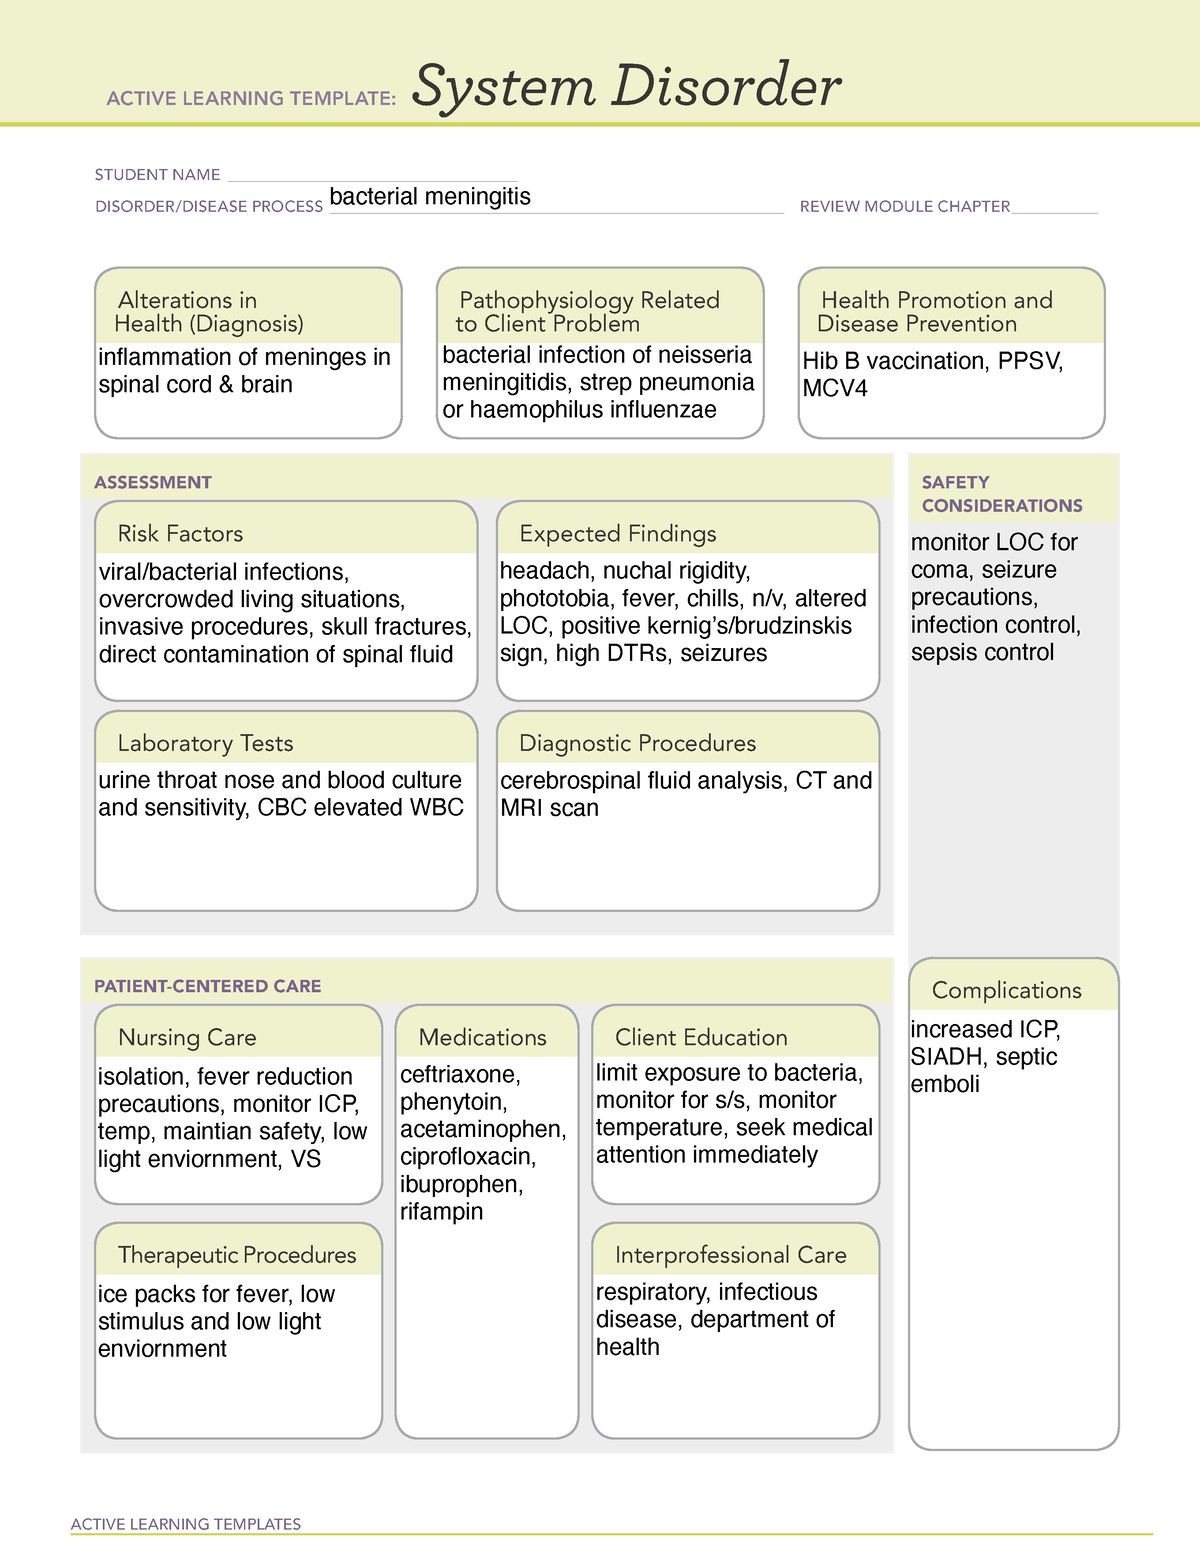 system-disorder-bacterial-meningitis-active-learning-templates-system